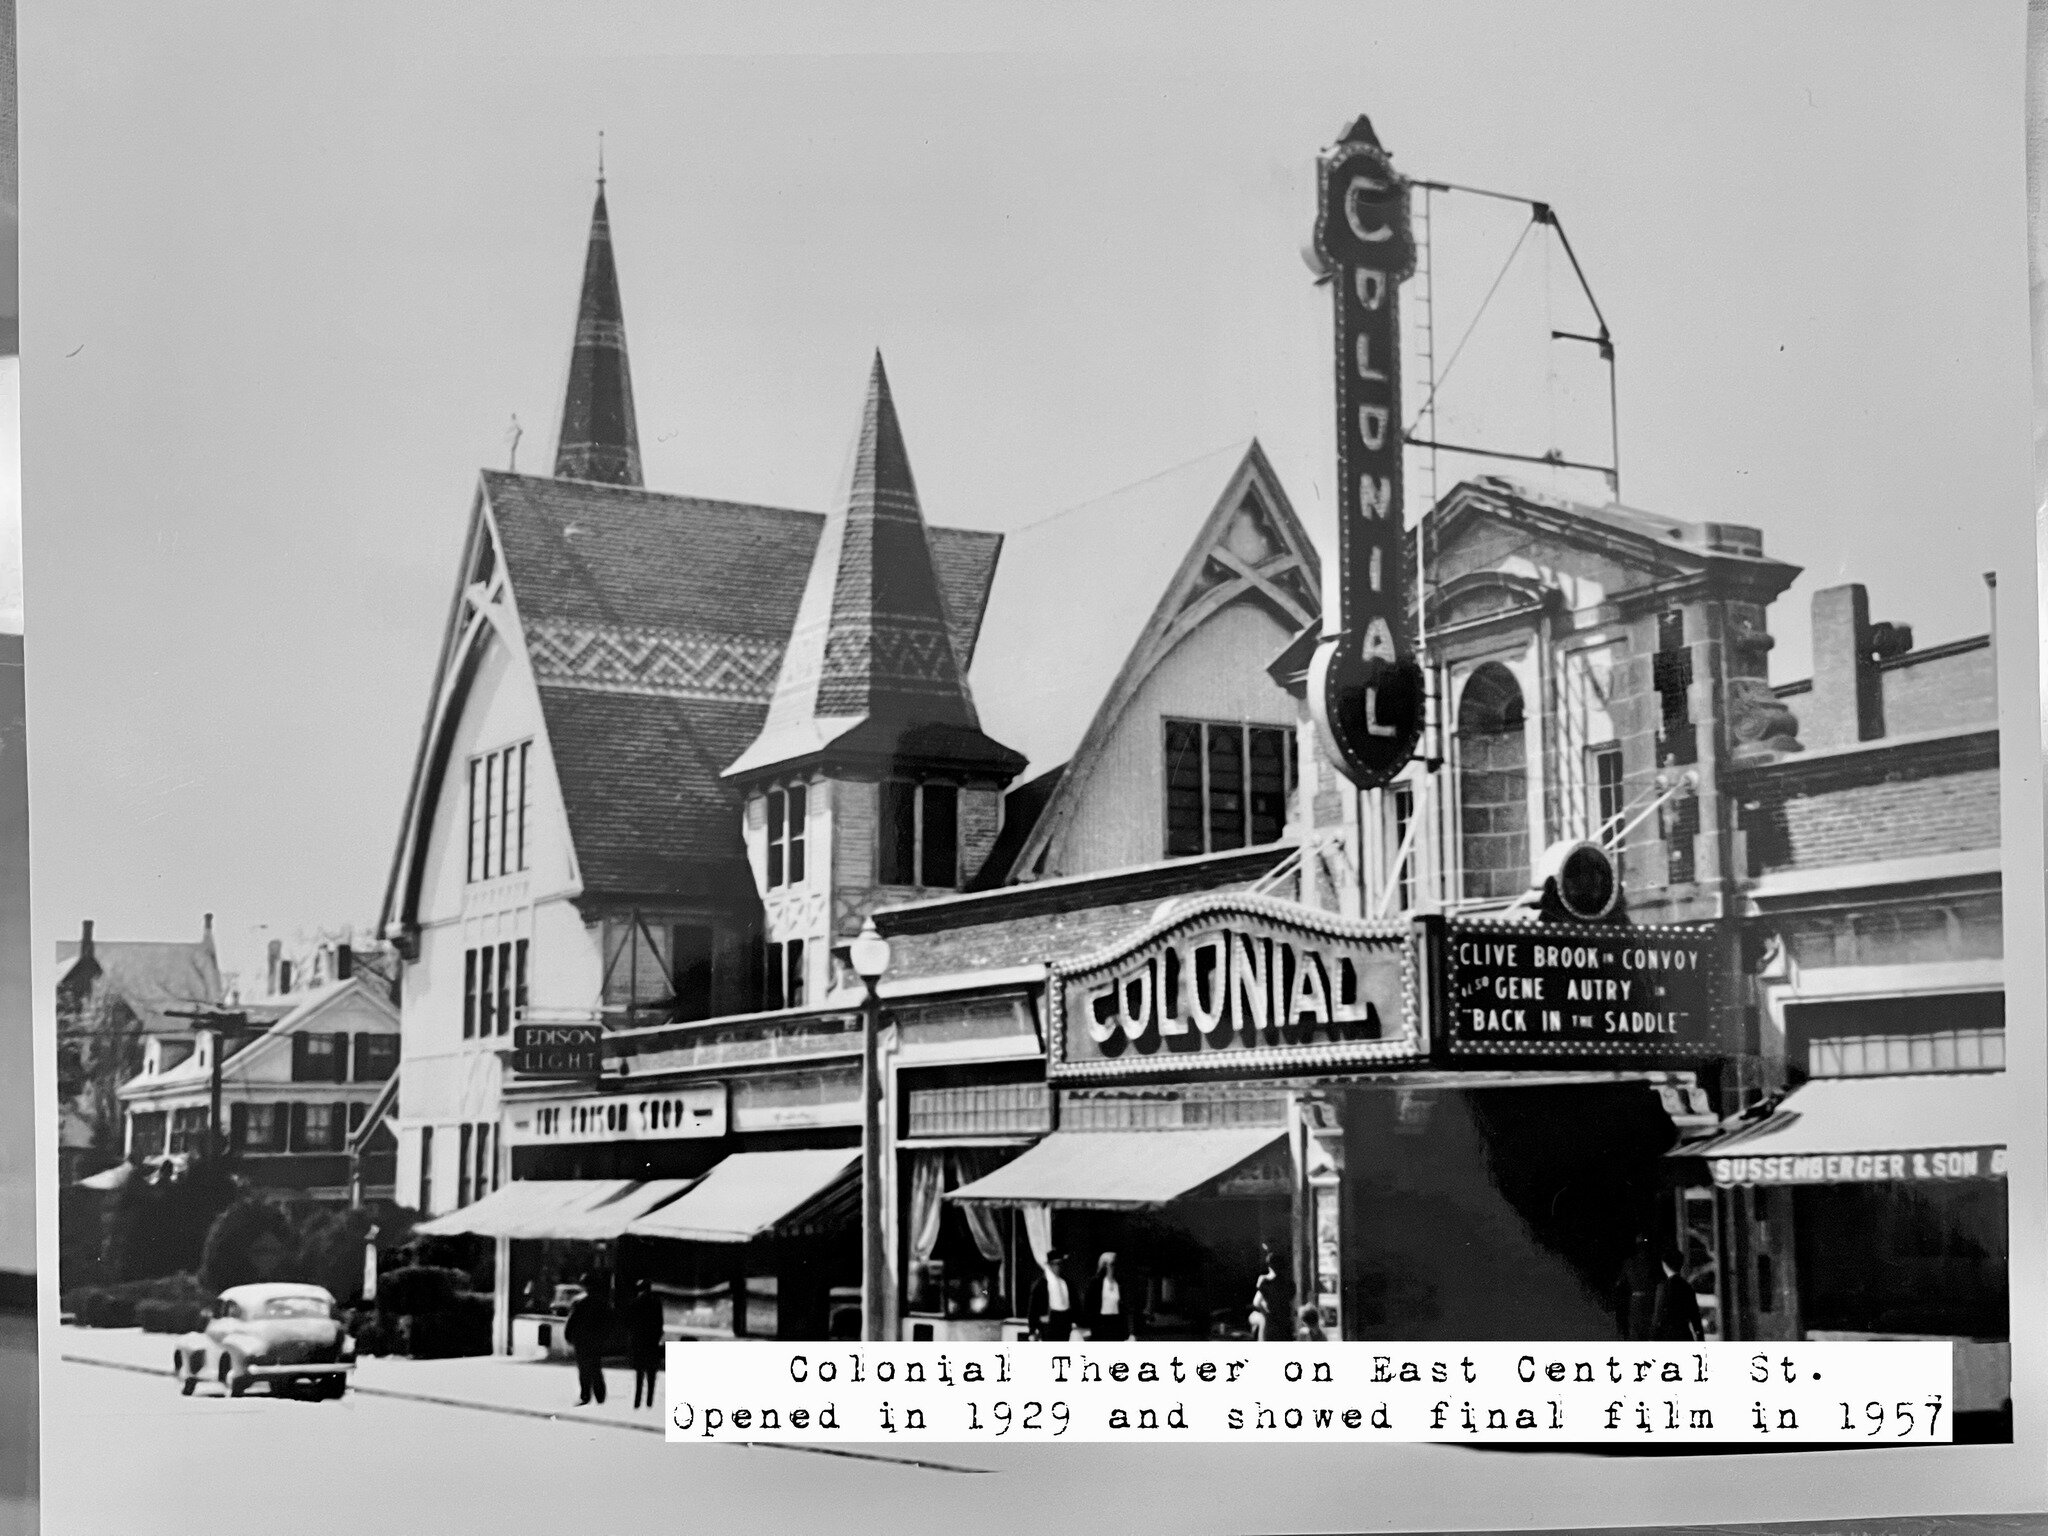 Nancy G. Harris managed the historic Colonial Theatre for almost twenty years, from 1929 until her untimely death in 1948. She founded the Colonial Theatre with her late husband, Fred Harris. Tragically, Fred passed away in January 19228 before the g